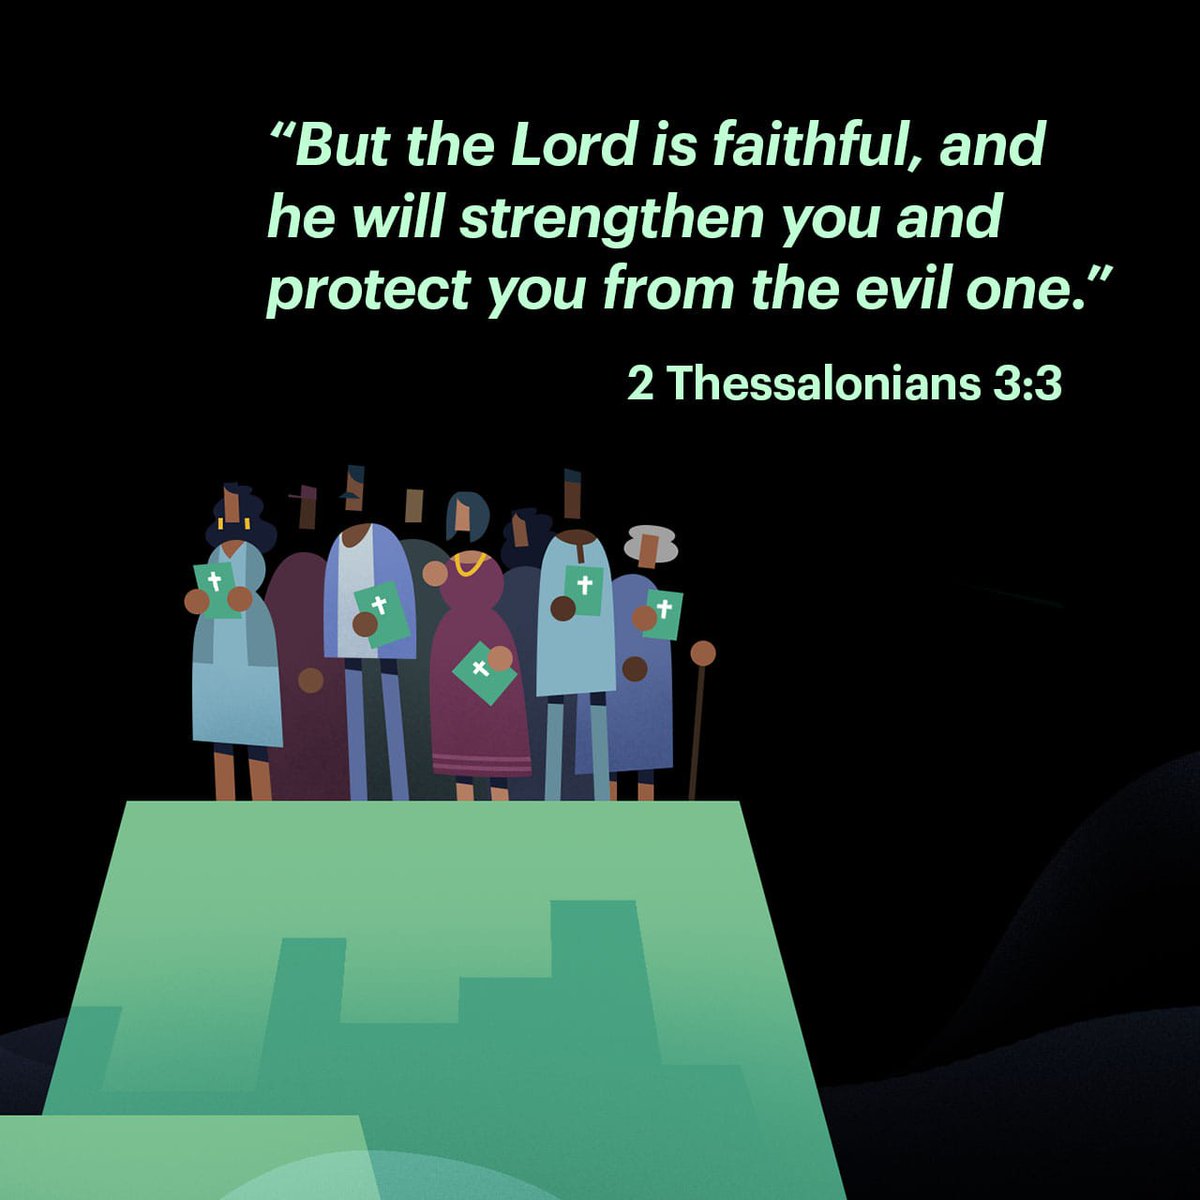 #christian #bible #bibleverse #biblestudy #christianity #christianquotes #christianlife #blessed #love #scripture #inspiration #influencer #motivation #instagood #instragram #trending #encouragement #photooftheday #followme #2thessalonians3v3 #faithful #protect #evil #one